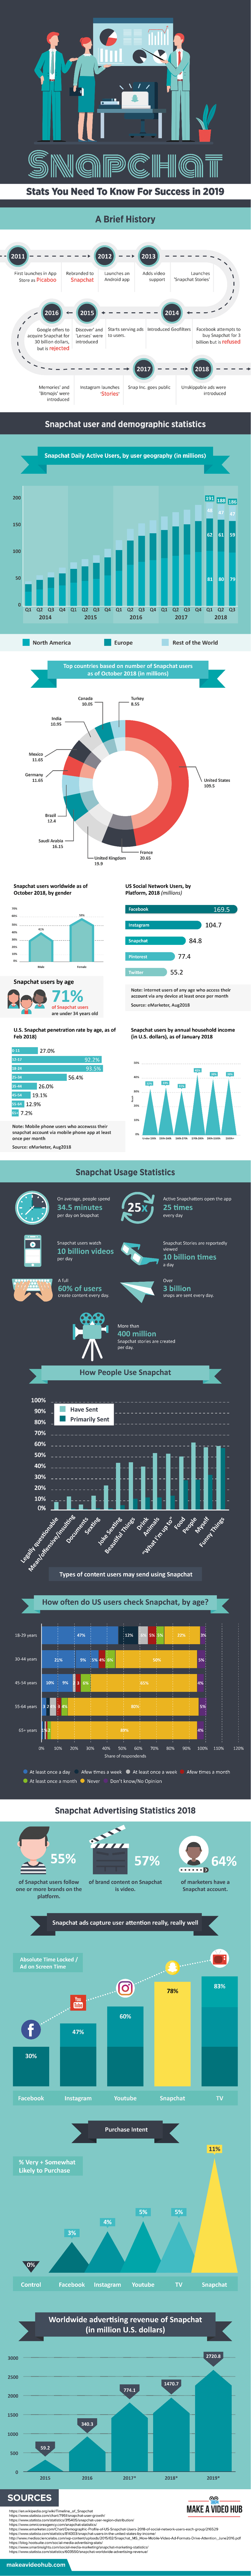 Snapchat Stats Infographic